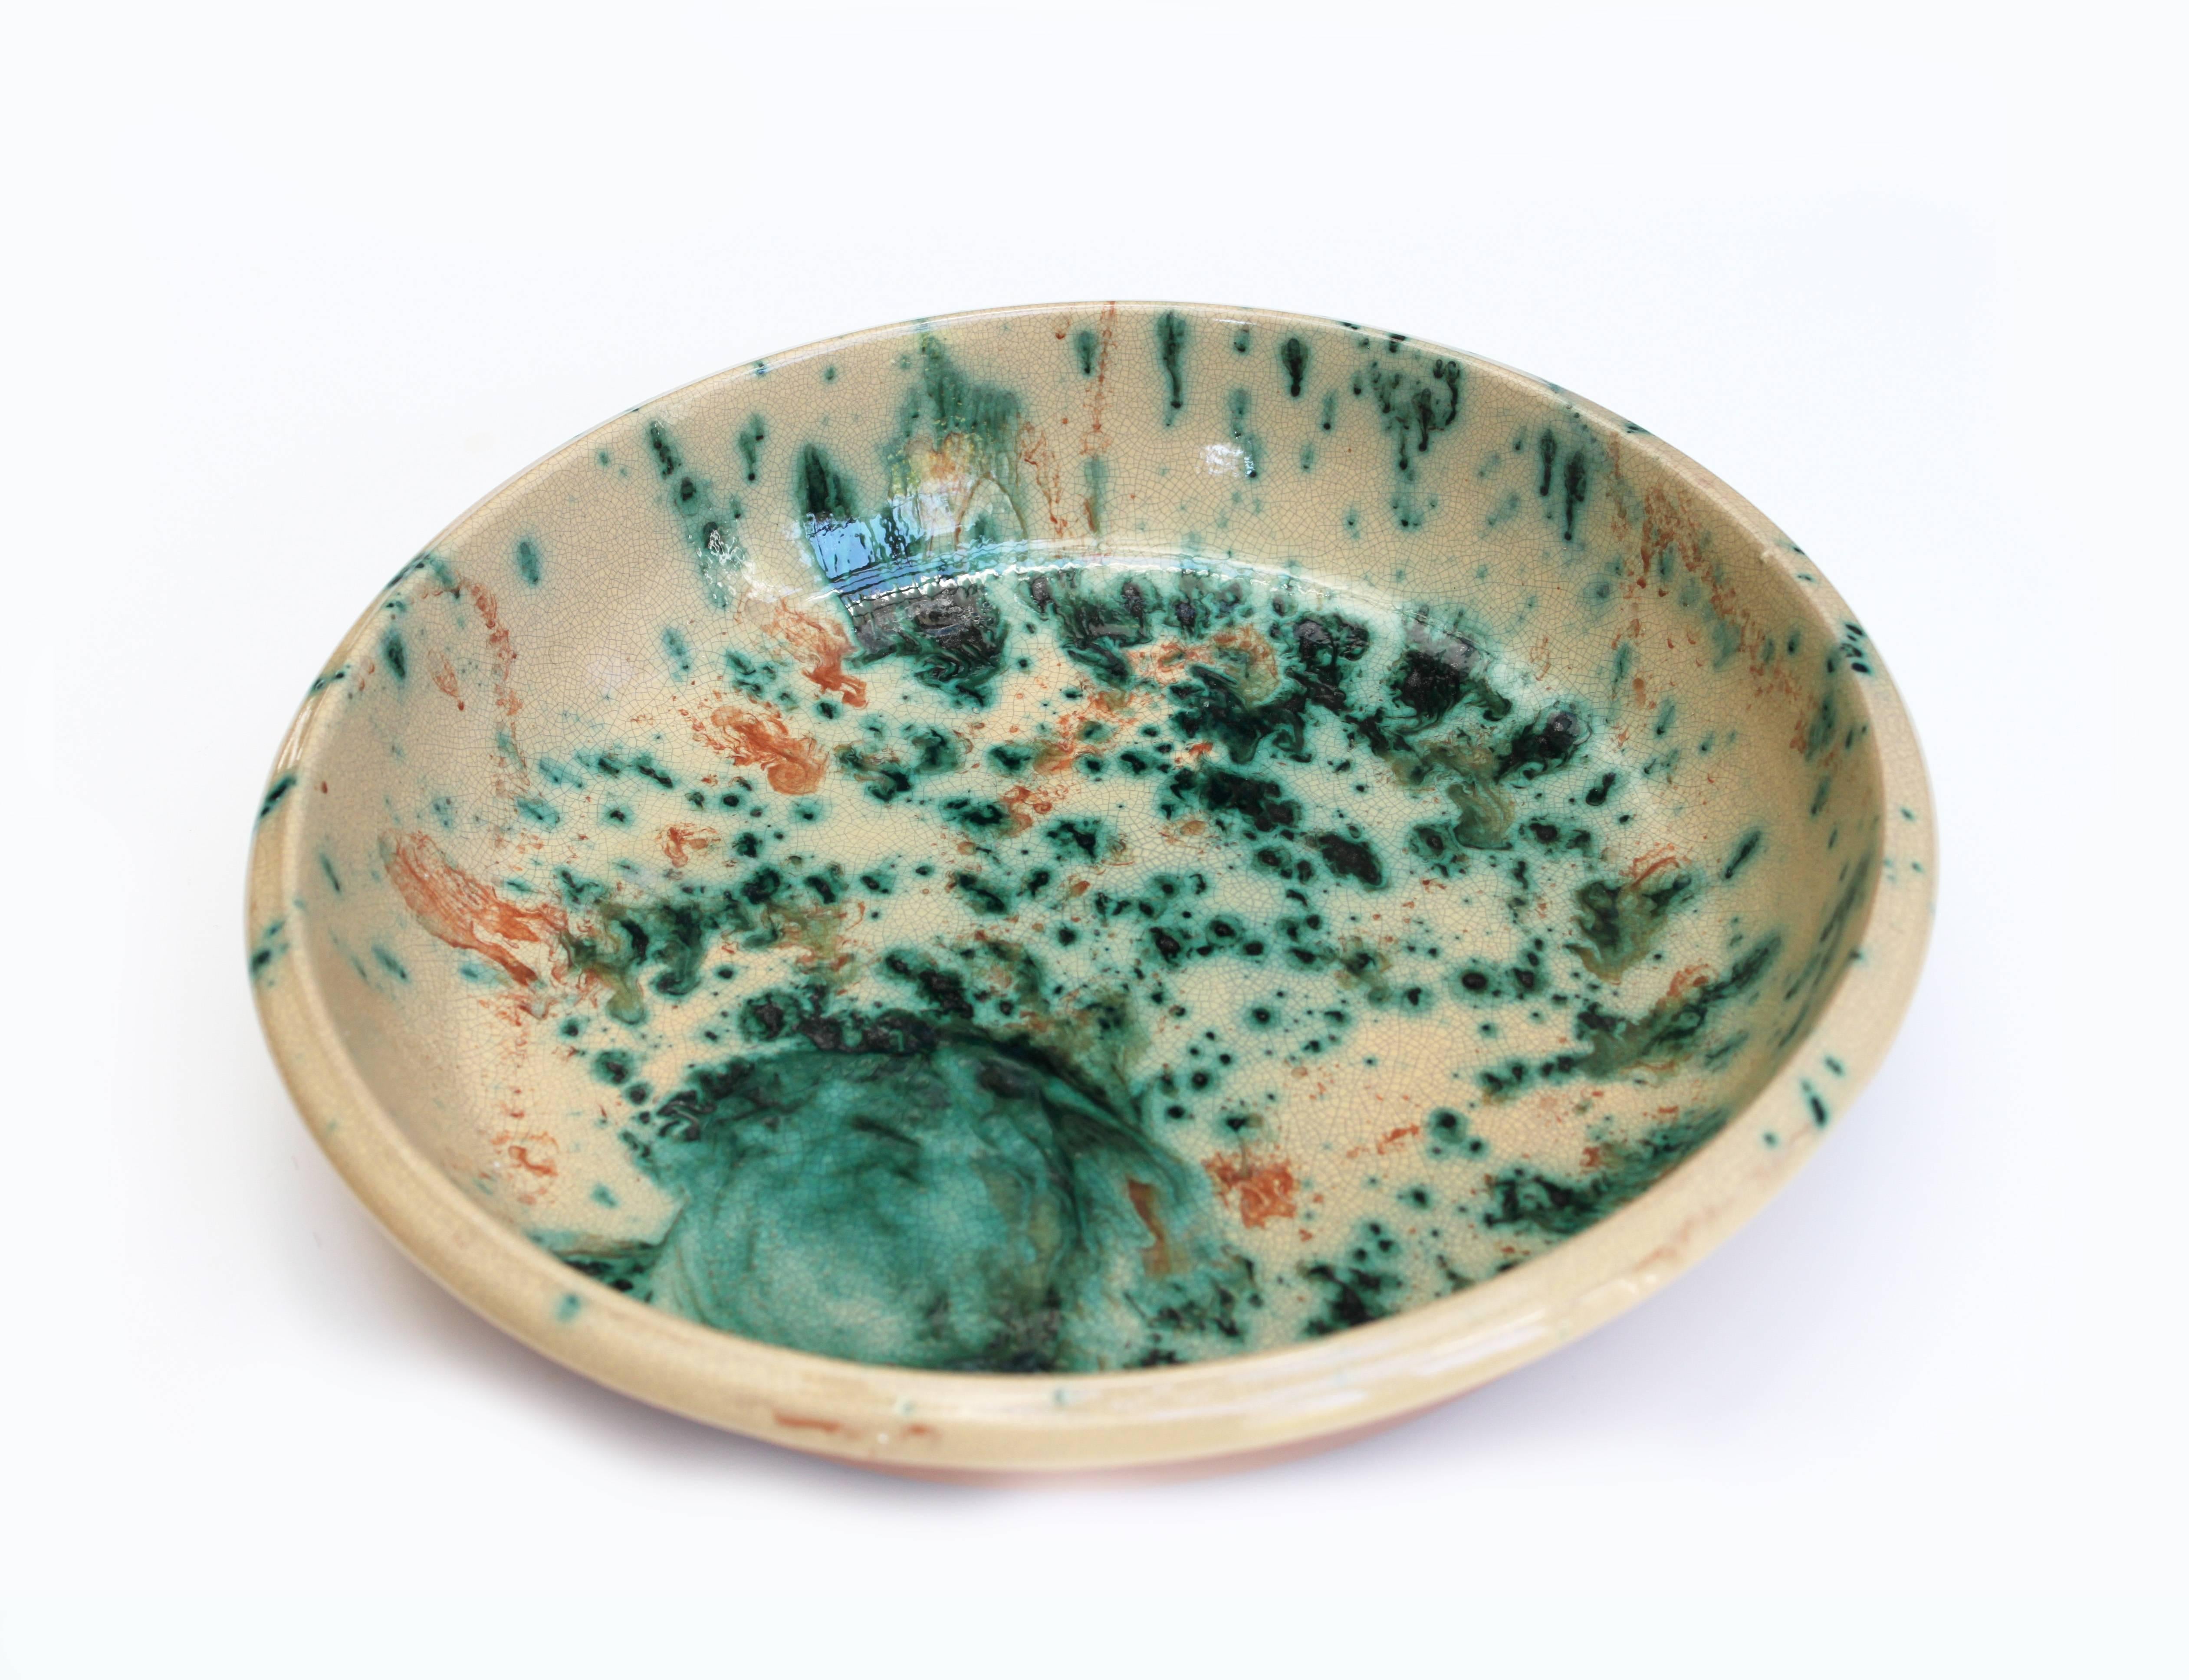 One of a kind hand-painted large ceramic bowl with beautfiful mix of greens, blues, oranges. This large bowl is handmade and painted in the South of Italy with the typical brush stroke decorative motif. Perfect as cabinet displays or as serving